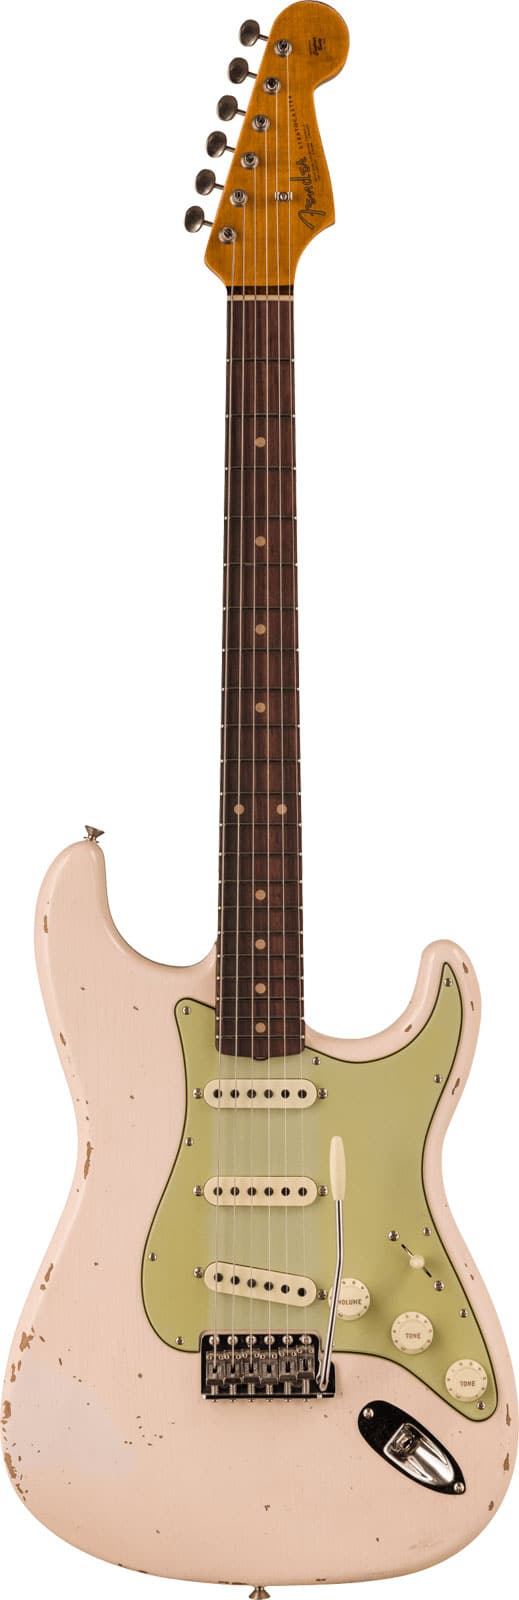 FENDER CUSTOM SHOP LATE 1962 STRATOCASTER RELIC WITH CLOSET CLASSIC HARDWARE RW SUPER FADED AGED SHELL PINK